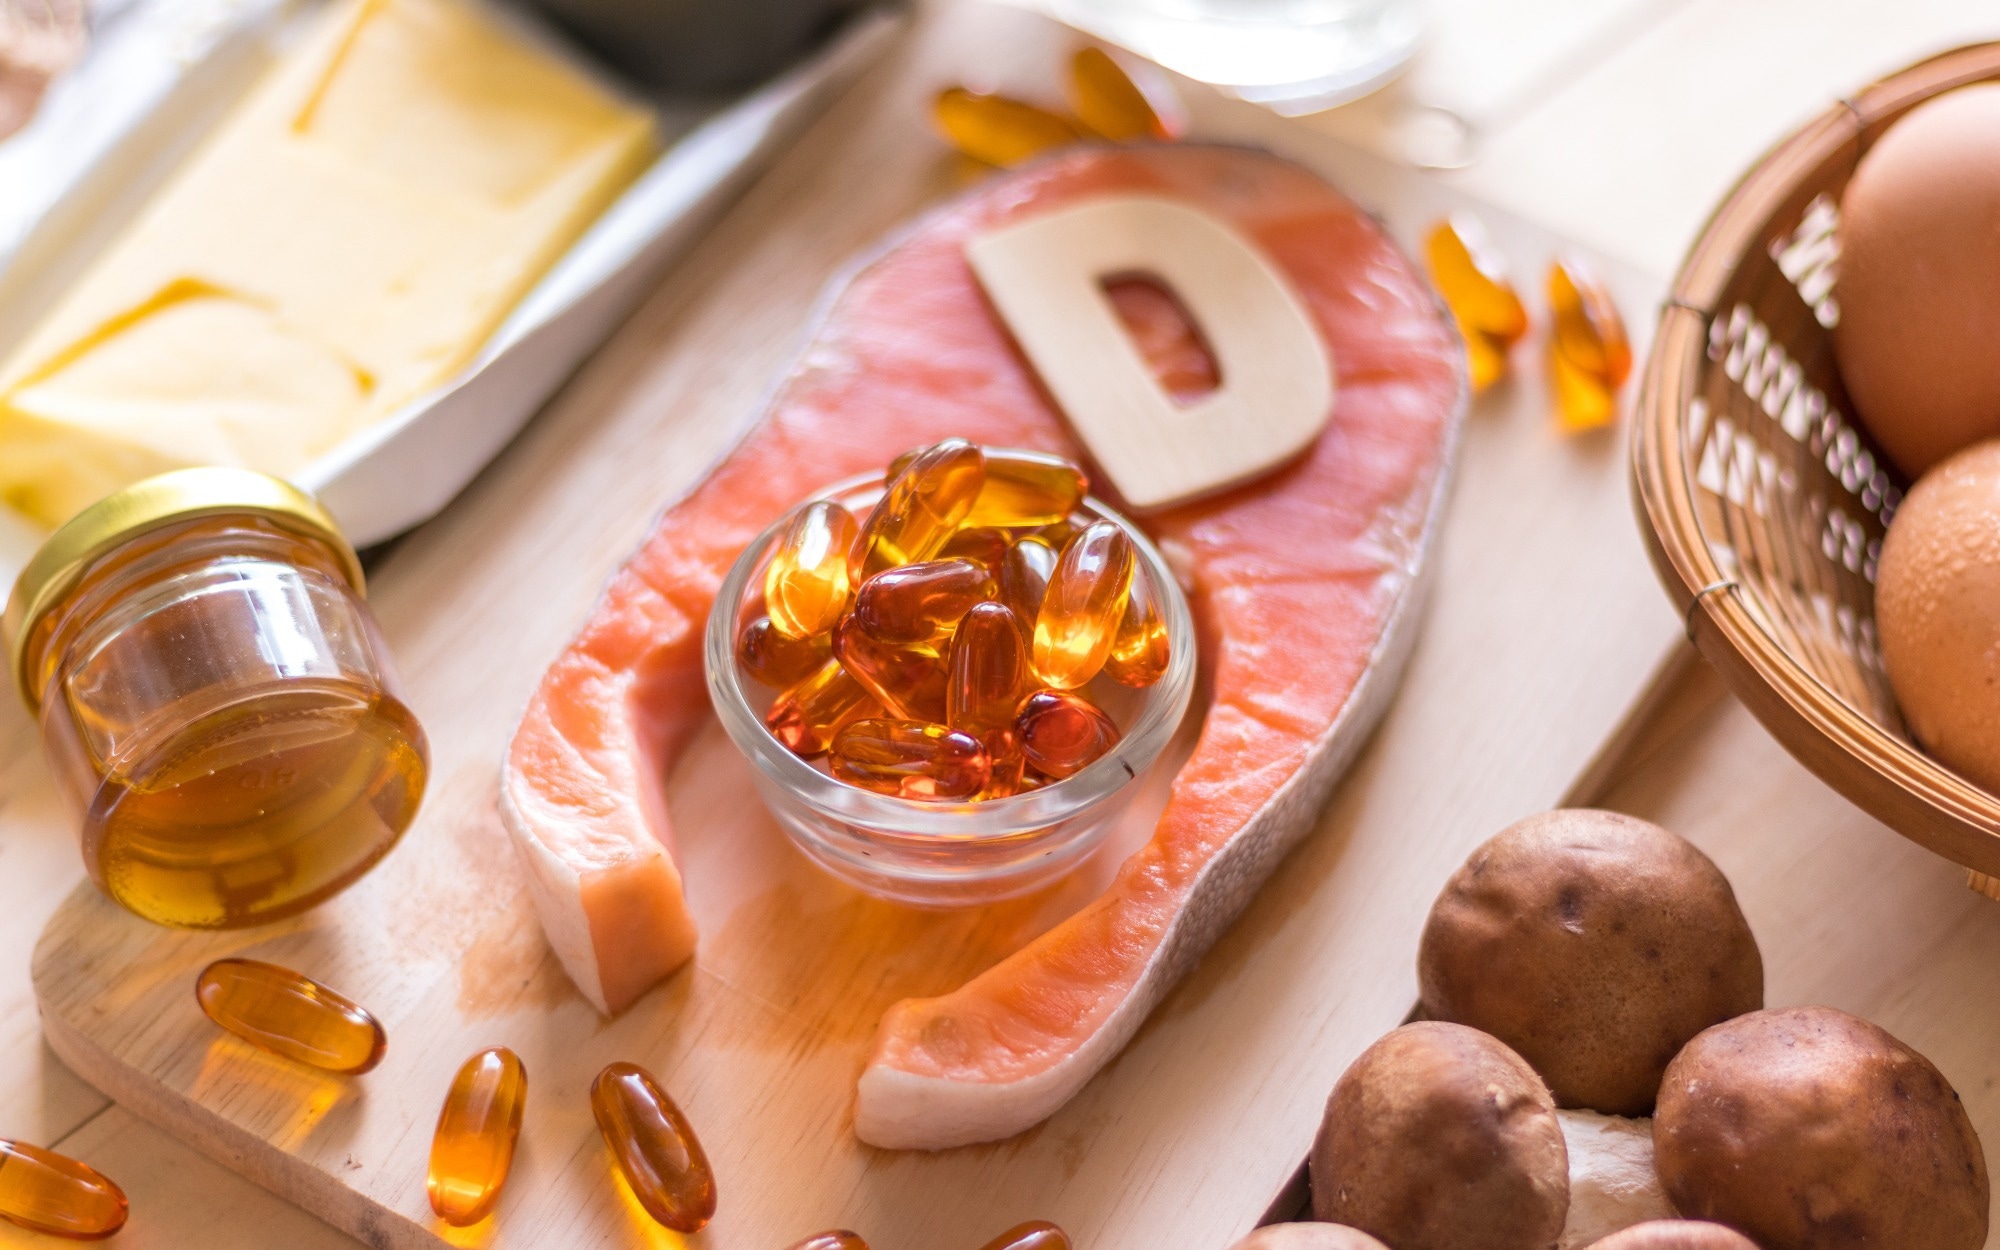 Review: The Power of Vitamin D: Is the Future in Precision Nutrition through Personalized Supplementation Plans? Image Credit: 1989studio / Shutterstock